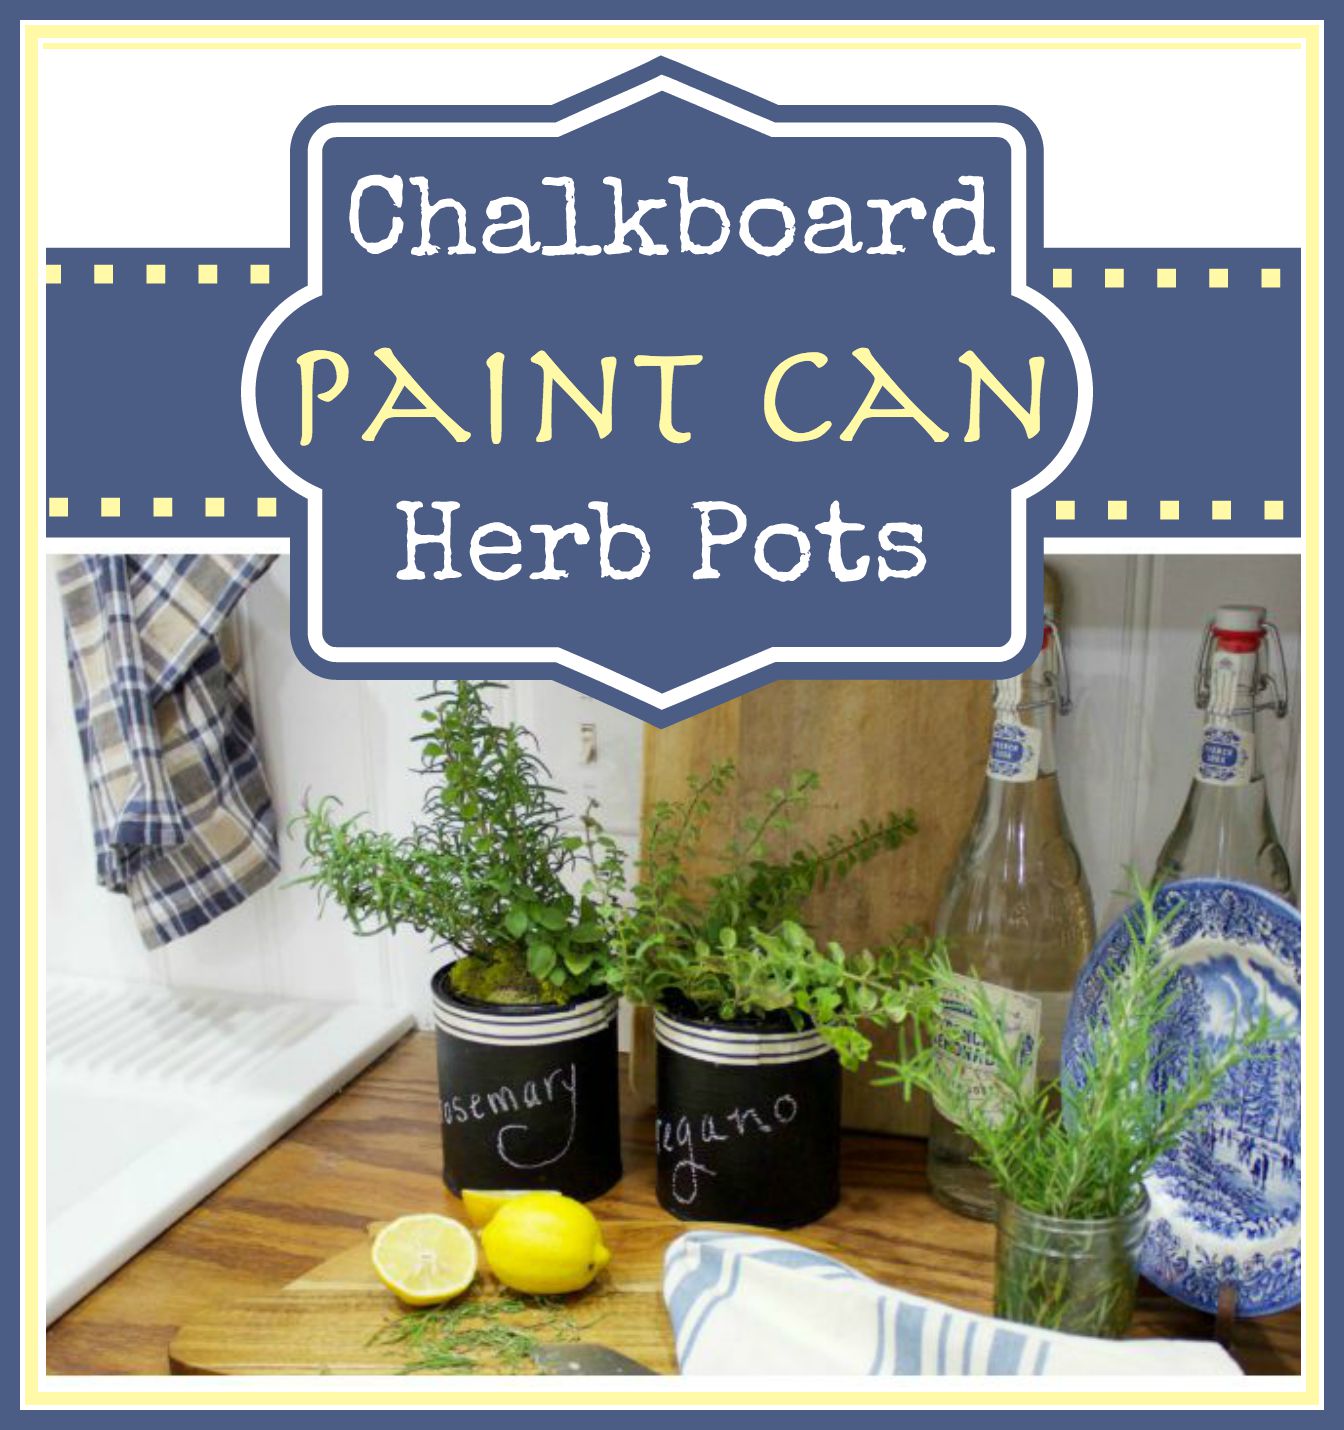 How to Create Paint Can Herb Pots by The Everyday Home | www.everydayhomeblog.com